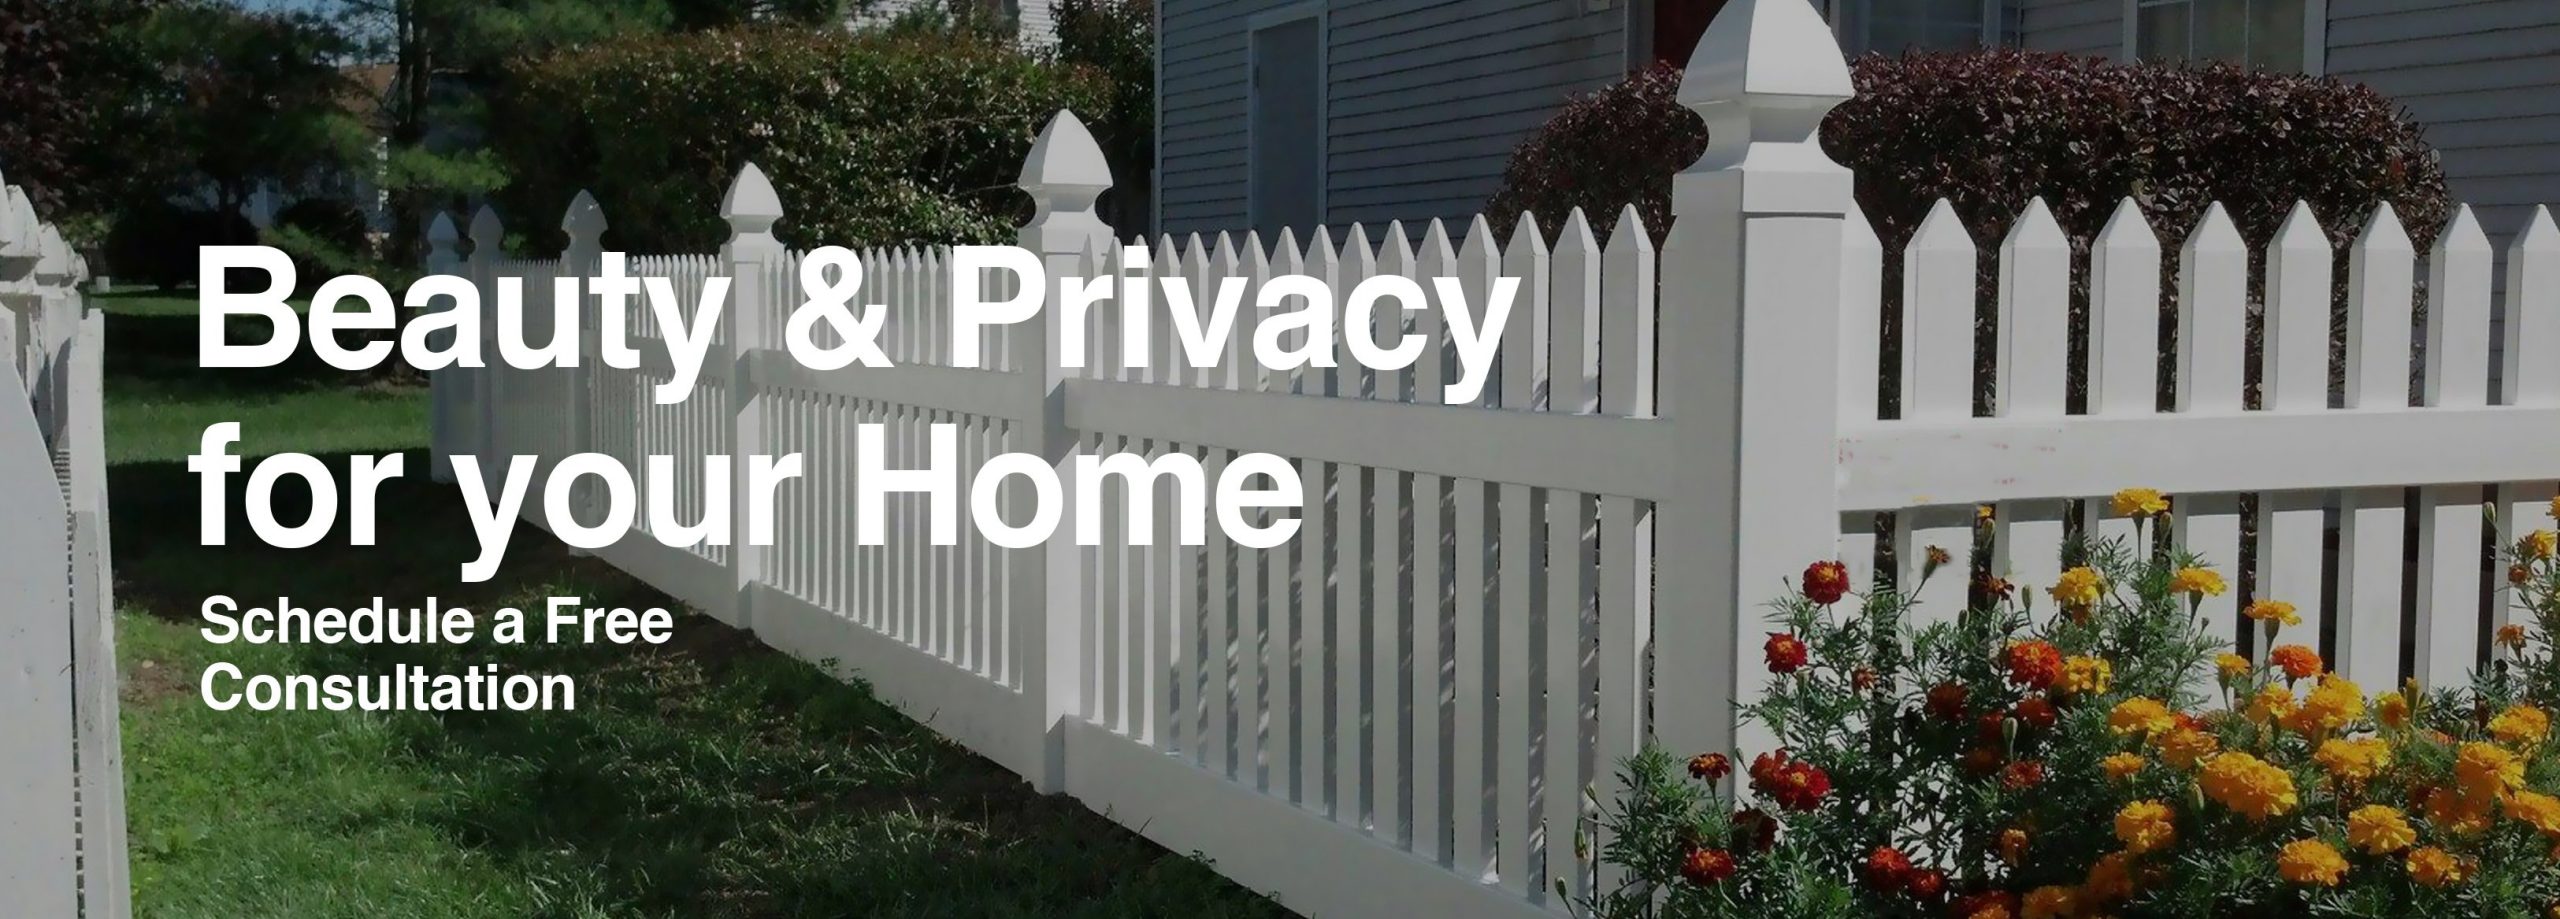 Beauty & Privacy in Your Home